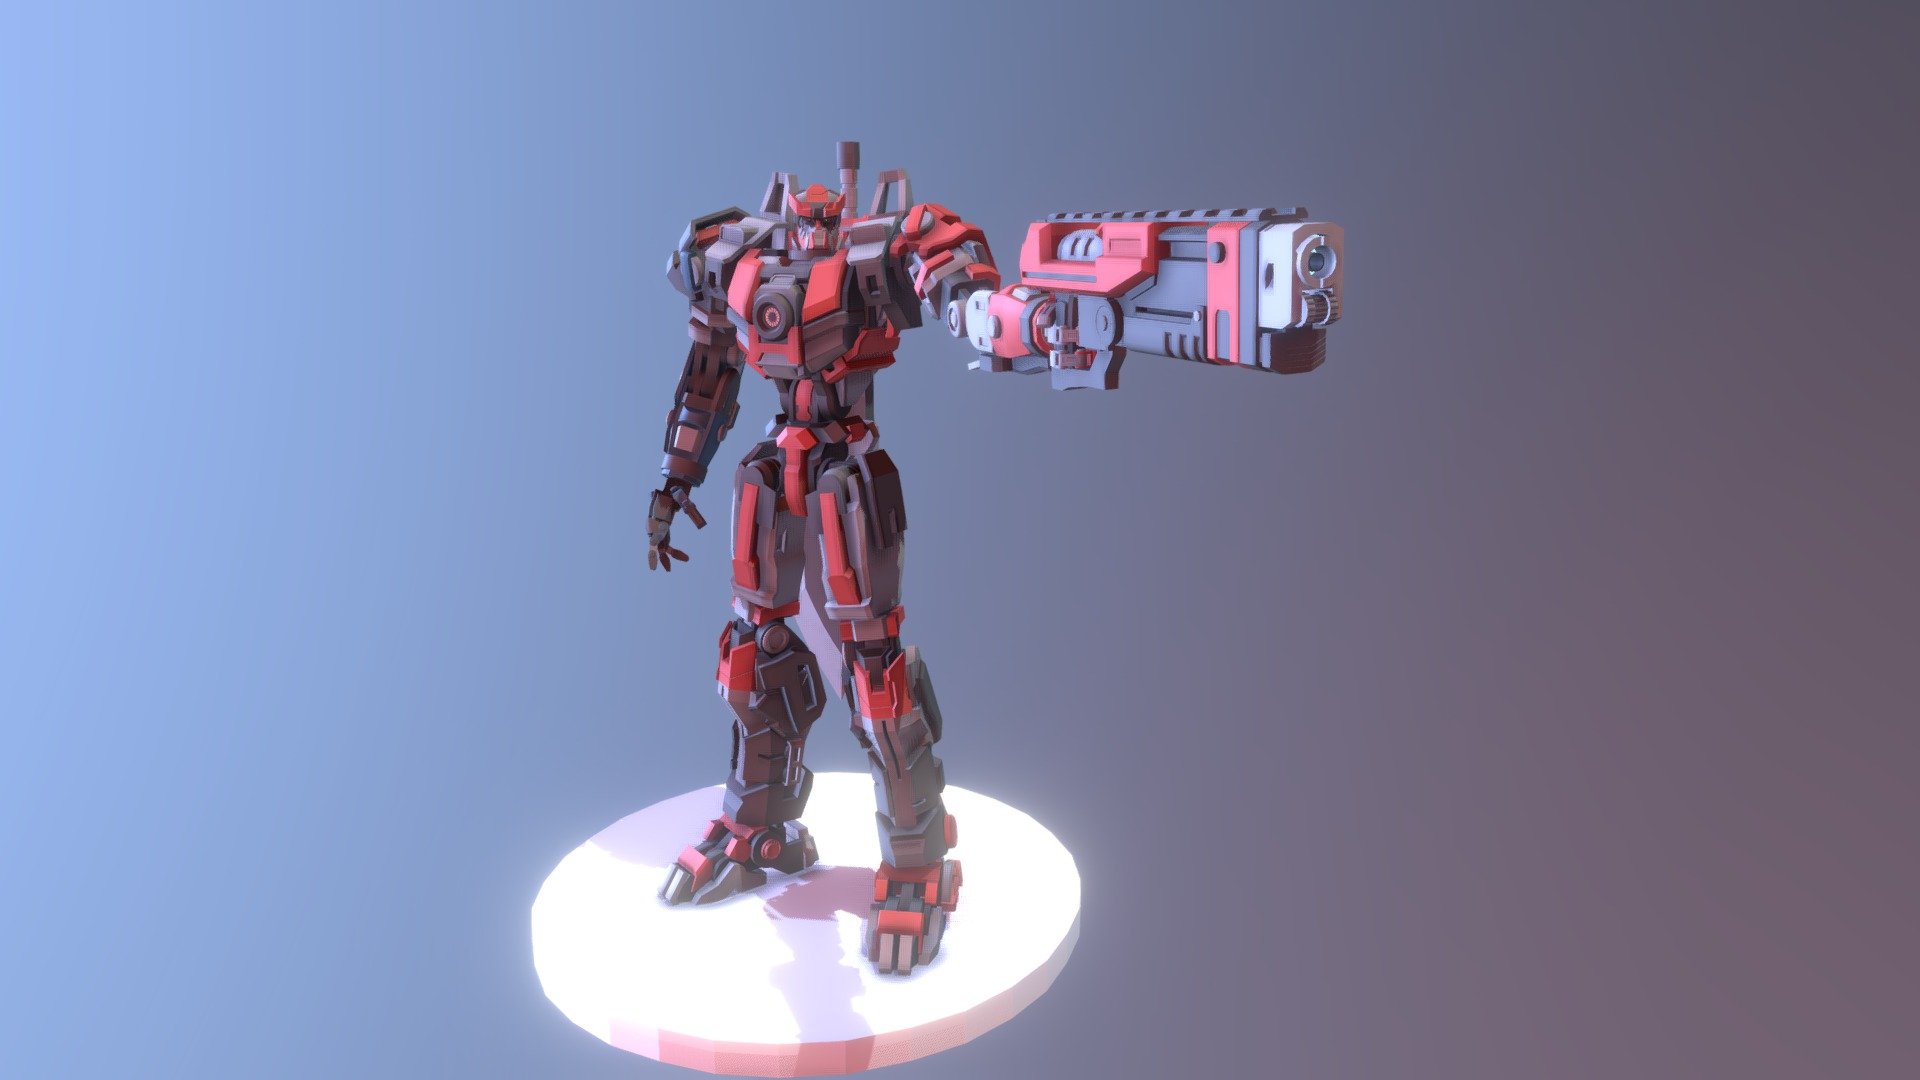 Giant robot with deadly weapons - Big Red  X Robot - 3D model by rijkisukmaa 3d model